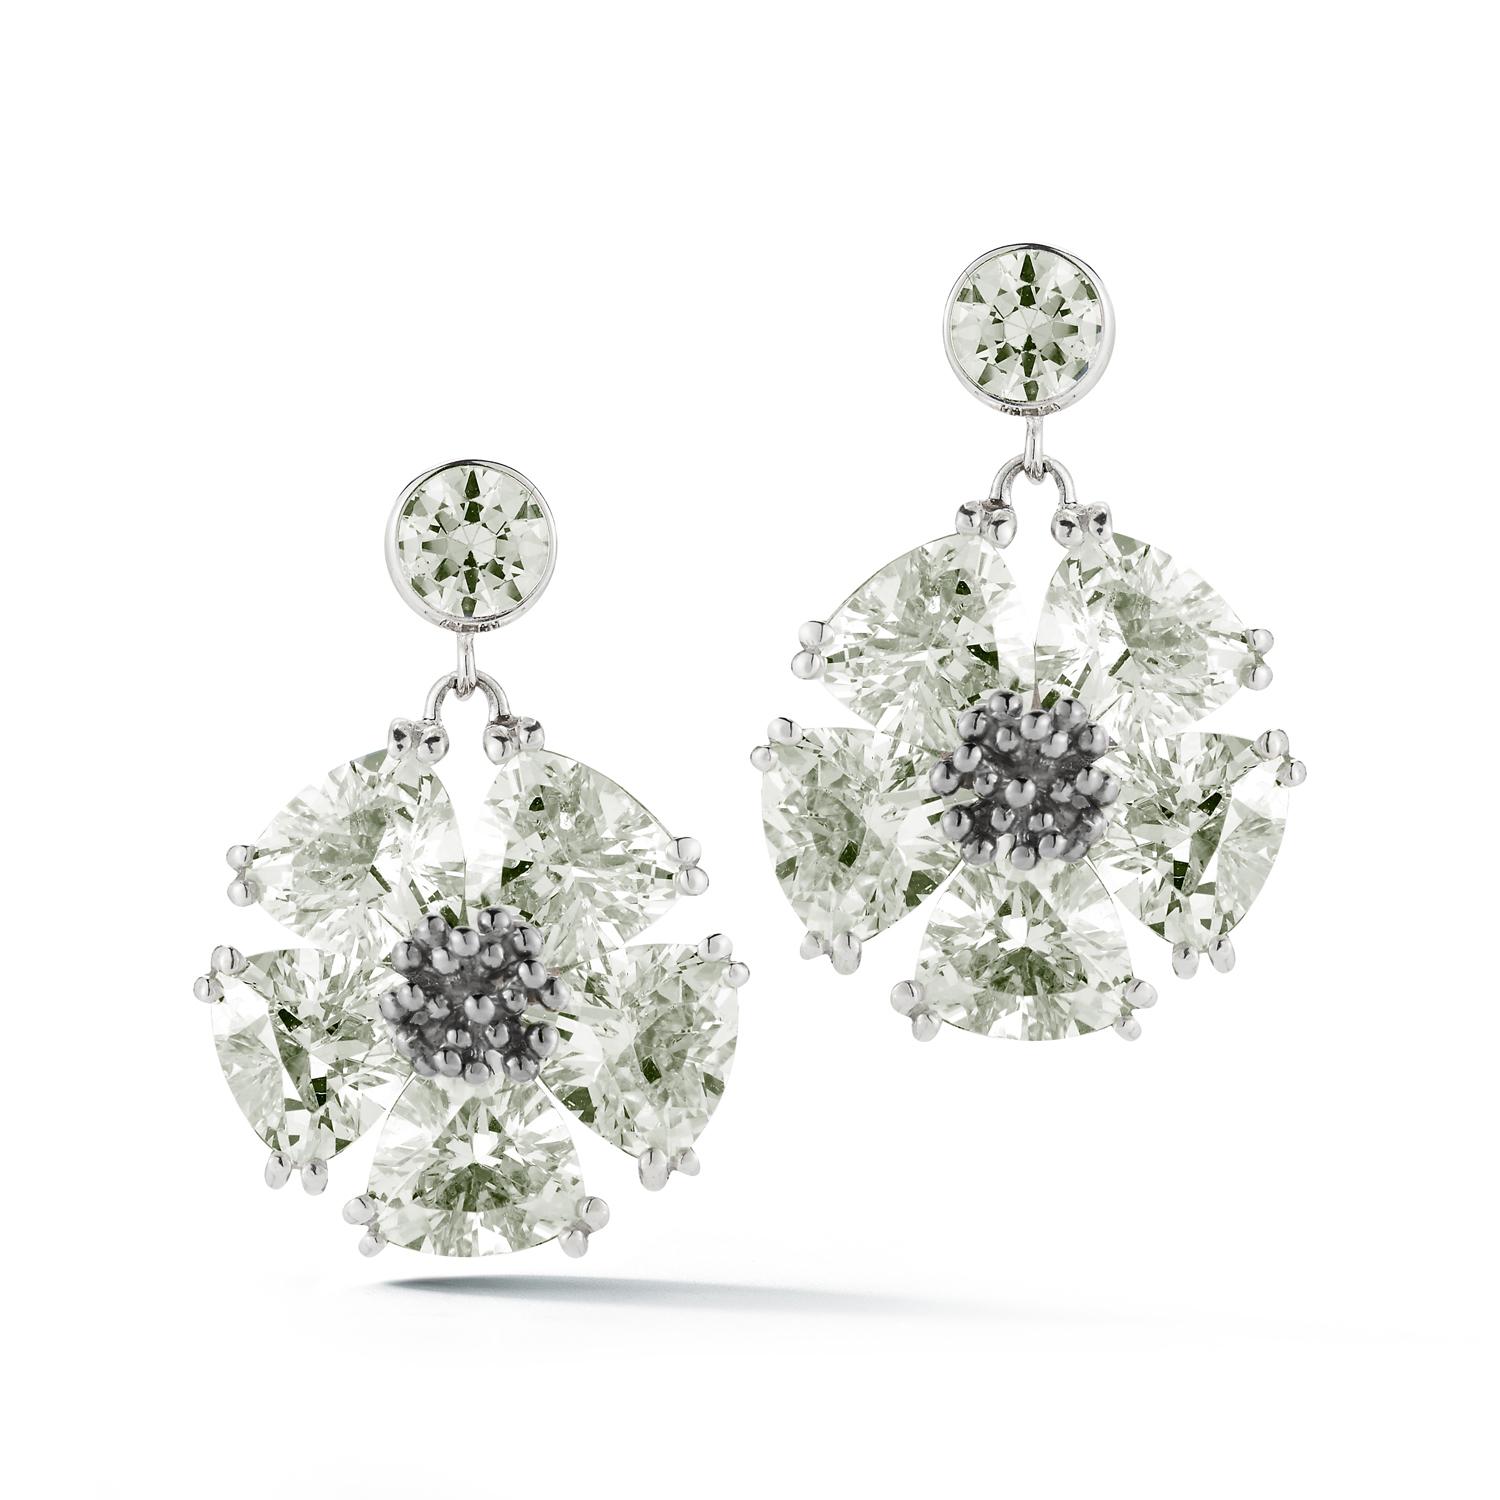 Designed in NYC

.925 Sterling Silver 12 x 7 mm White Sapphire Single Blossom Drop Earrings. The beauty of blossom blings with small stone top stud earring and dangling stone blossom in its full splendor! Single blossom stone drop earrings: